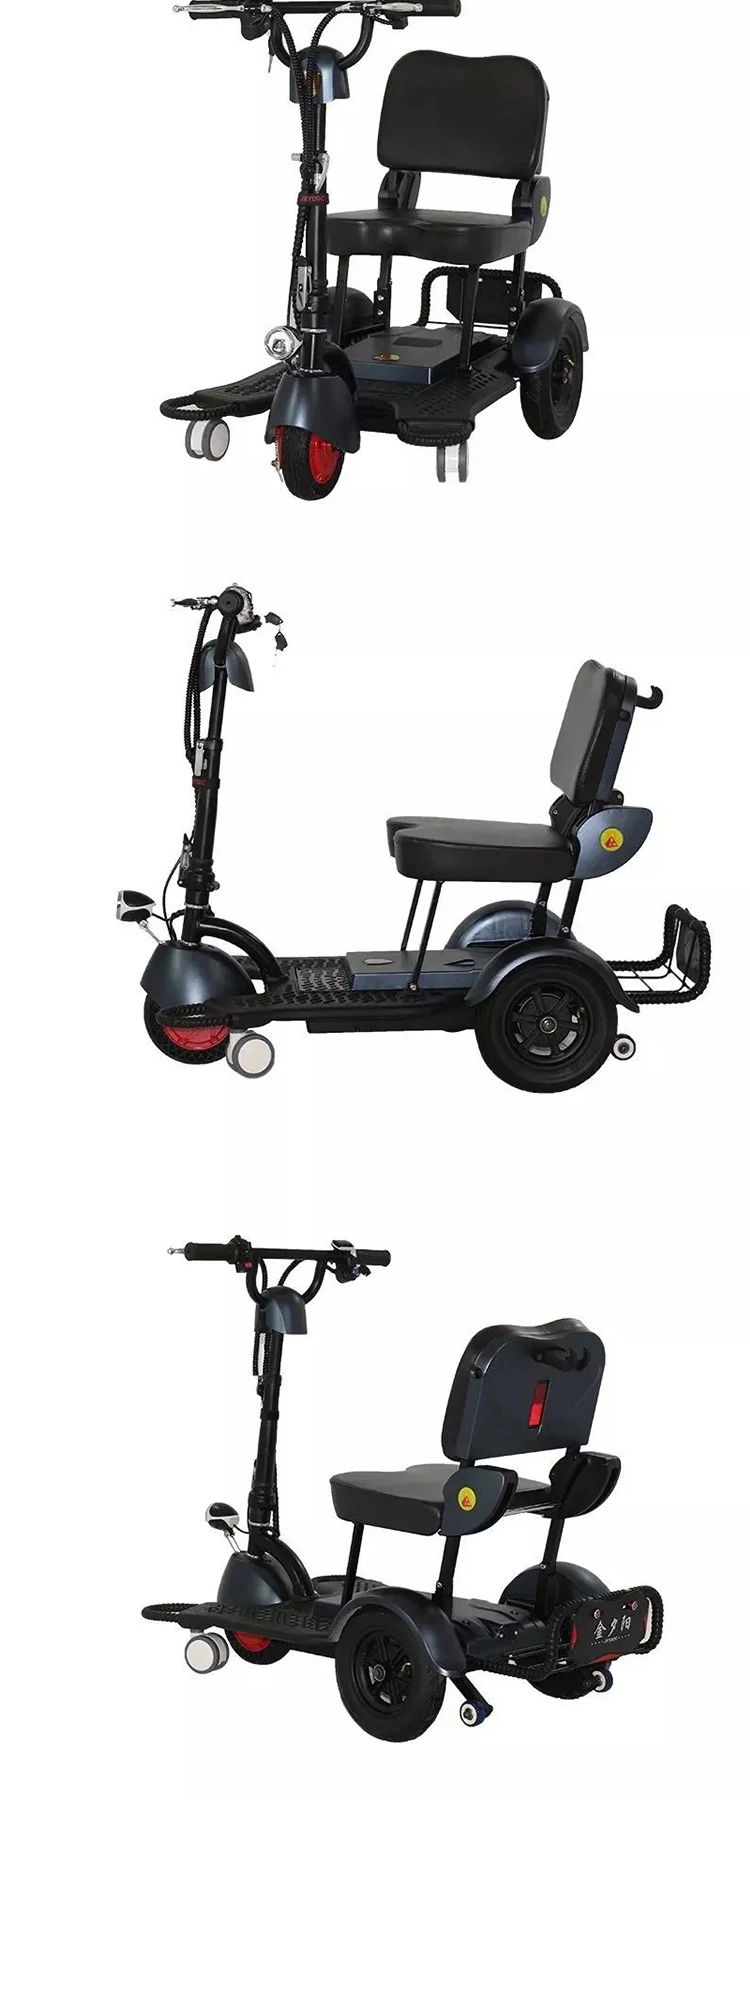 China Three Wheel Foldable Rechargeable Electric Scooter Adult Tricycle Cheap Price Adult Electric Tricycle